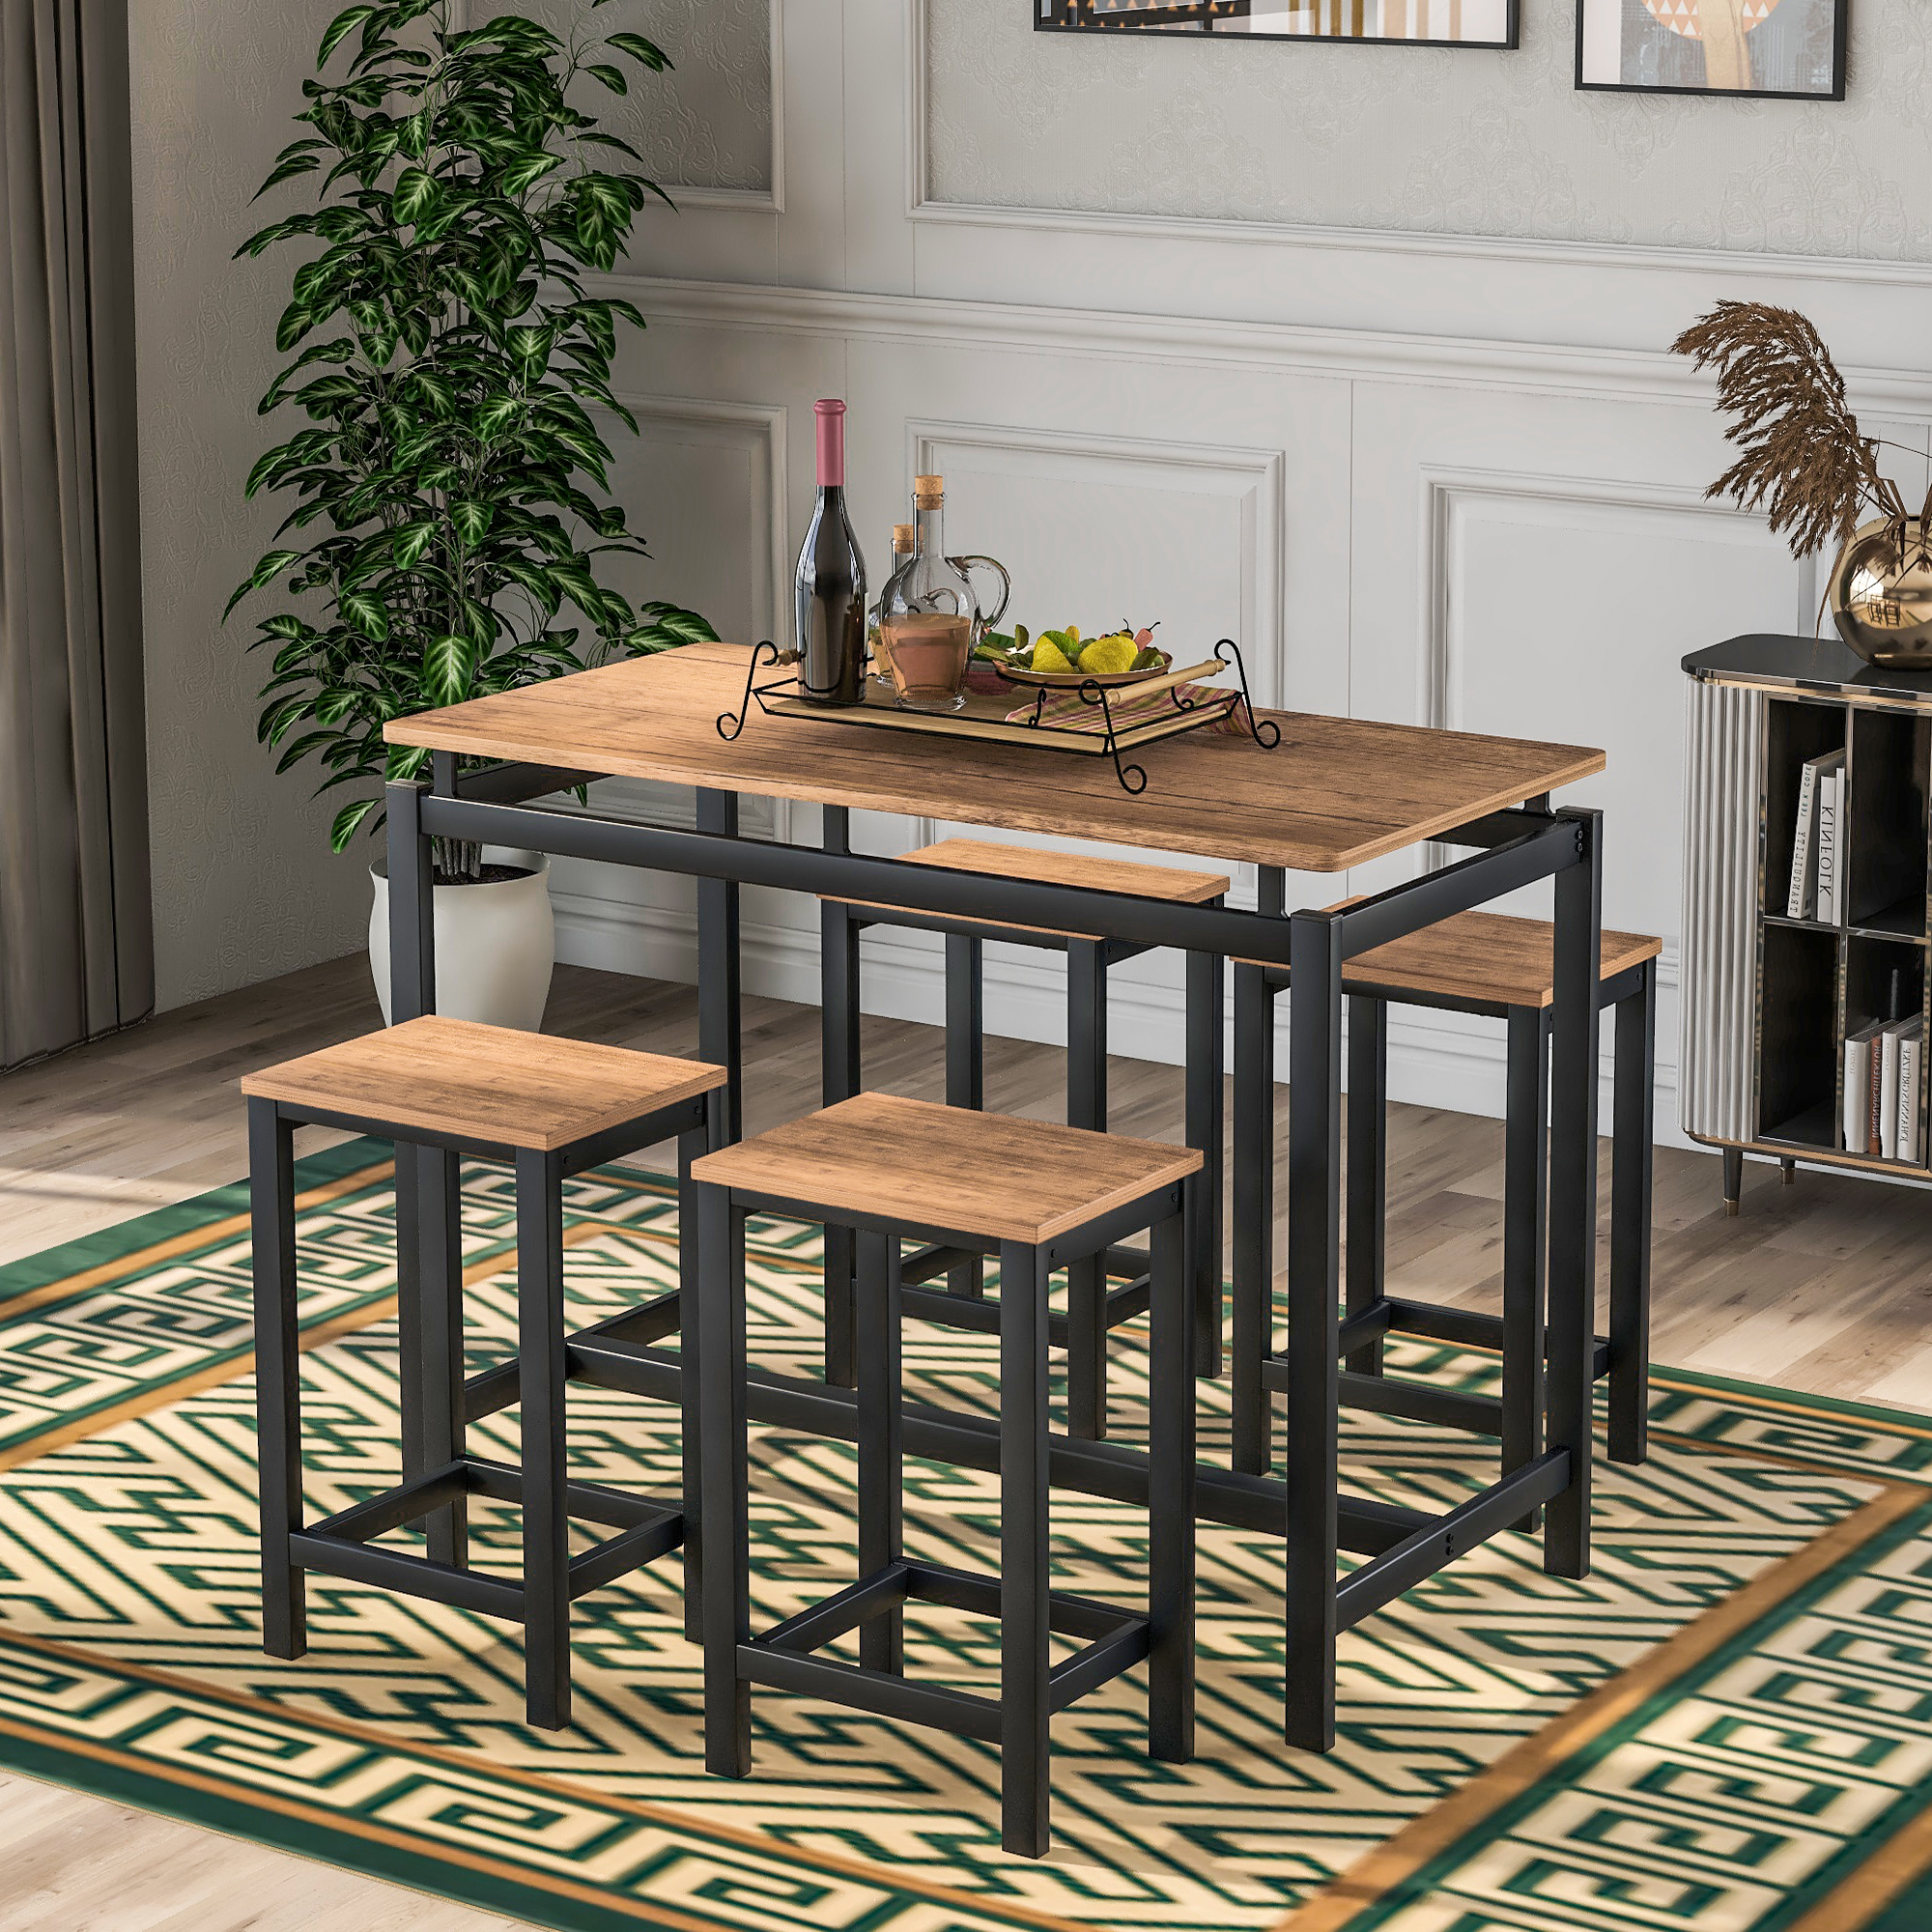  5-Piece Kitchen Counter Height Table Set, Industrial Dining Table with 4 Chairs (Brown)-Boyel Living